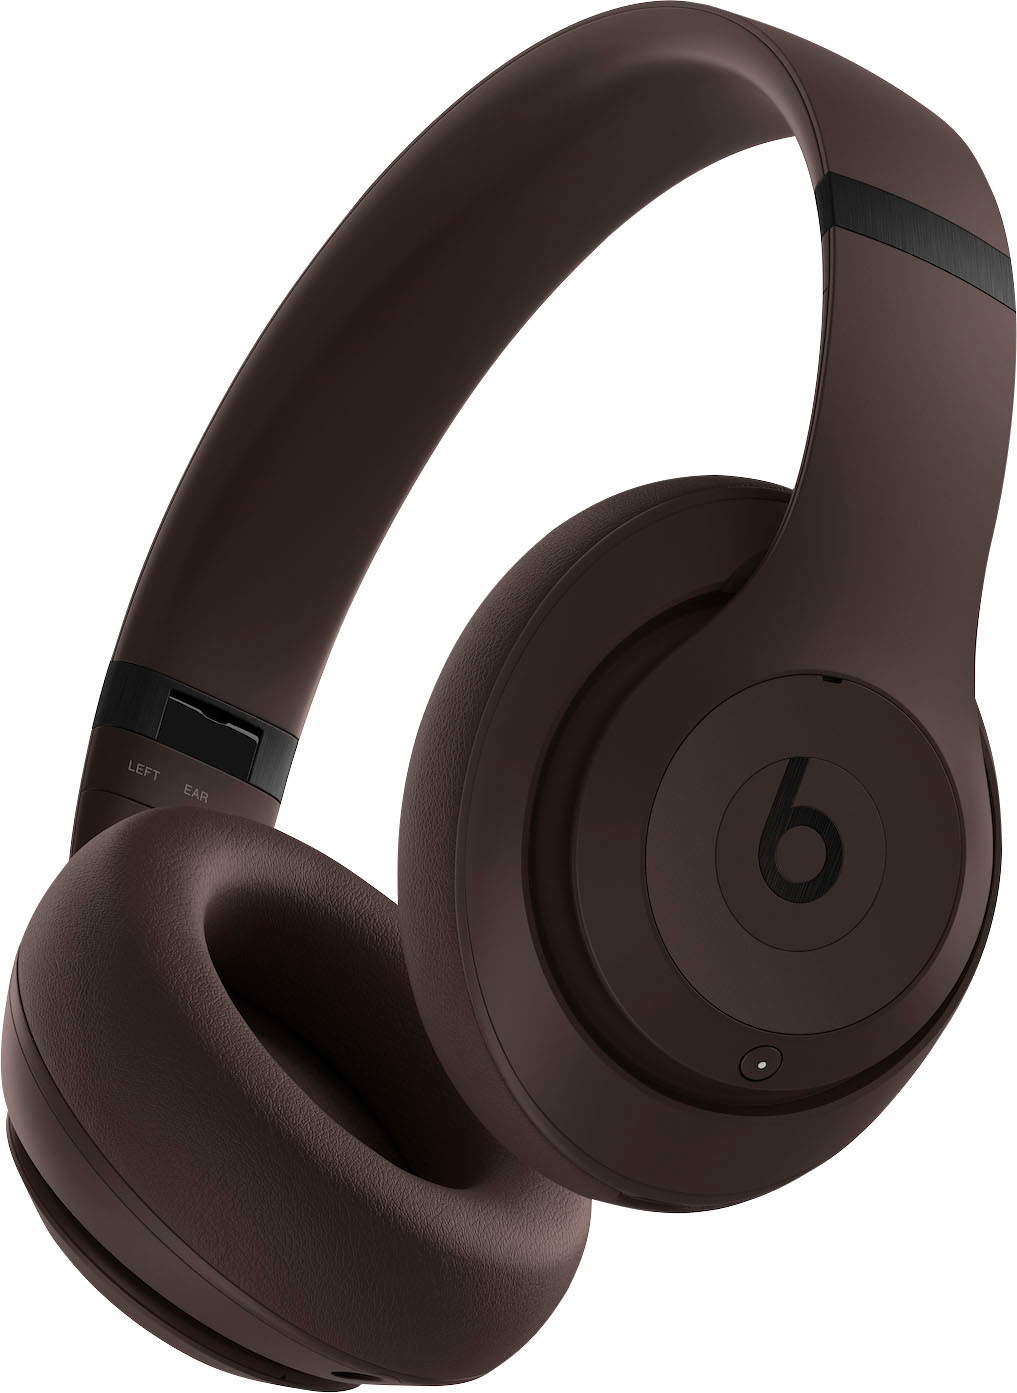 Beats by Dr. Dre Beats Studio Pro Wireless Noise Cancelling Over-the-Ear Deep Brown MQTT3LL/A Best Buy